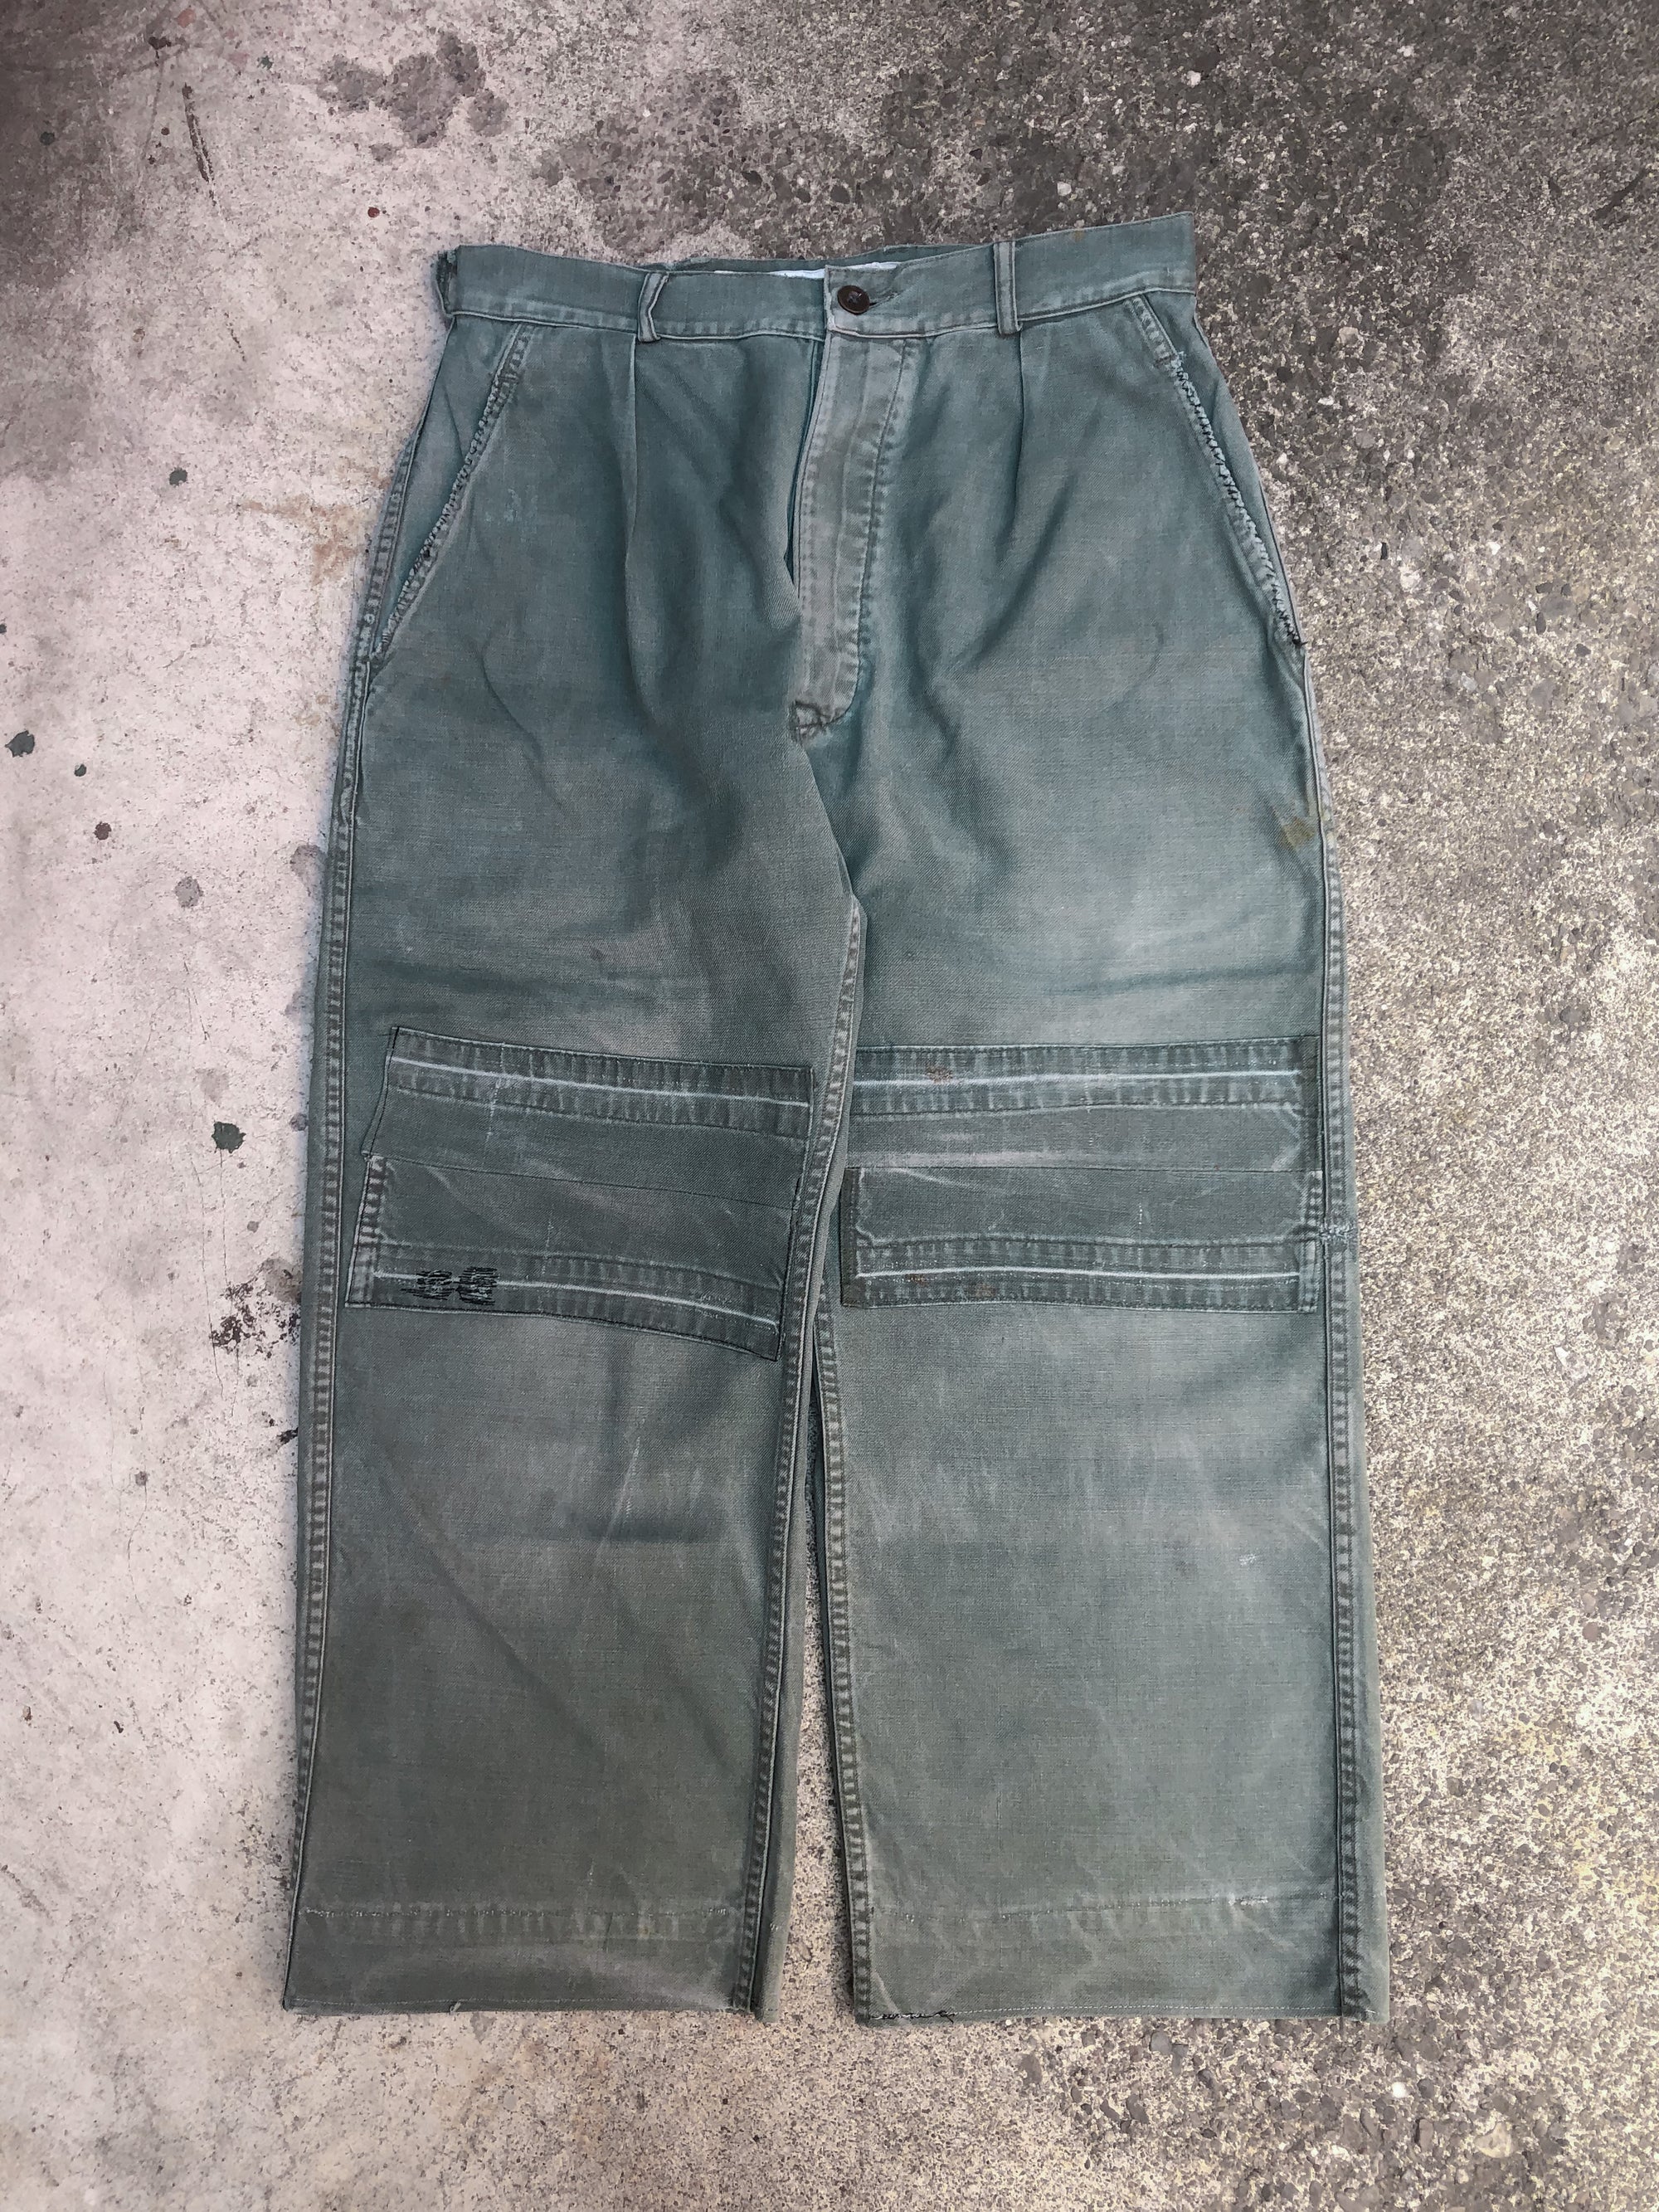 1950s Algerian War Era Repaired Faded Green French Work Pants (30X26)